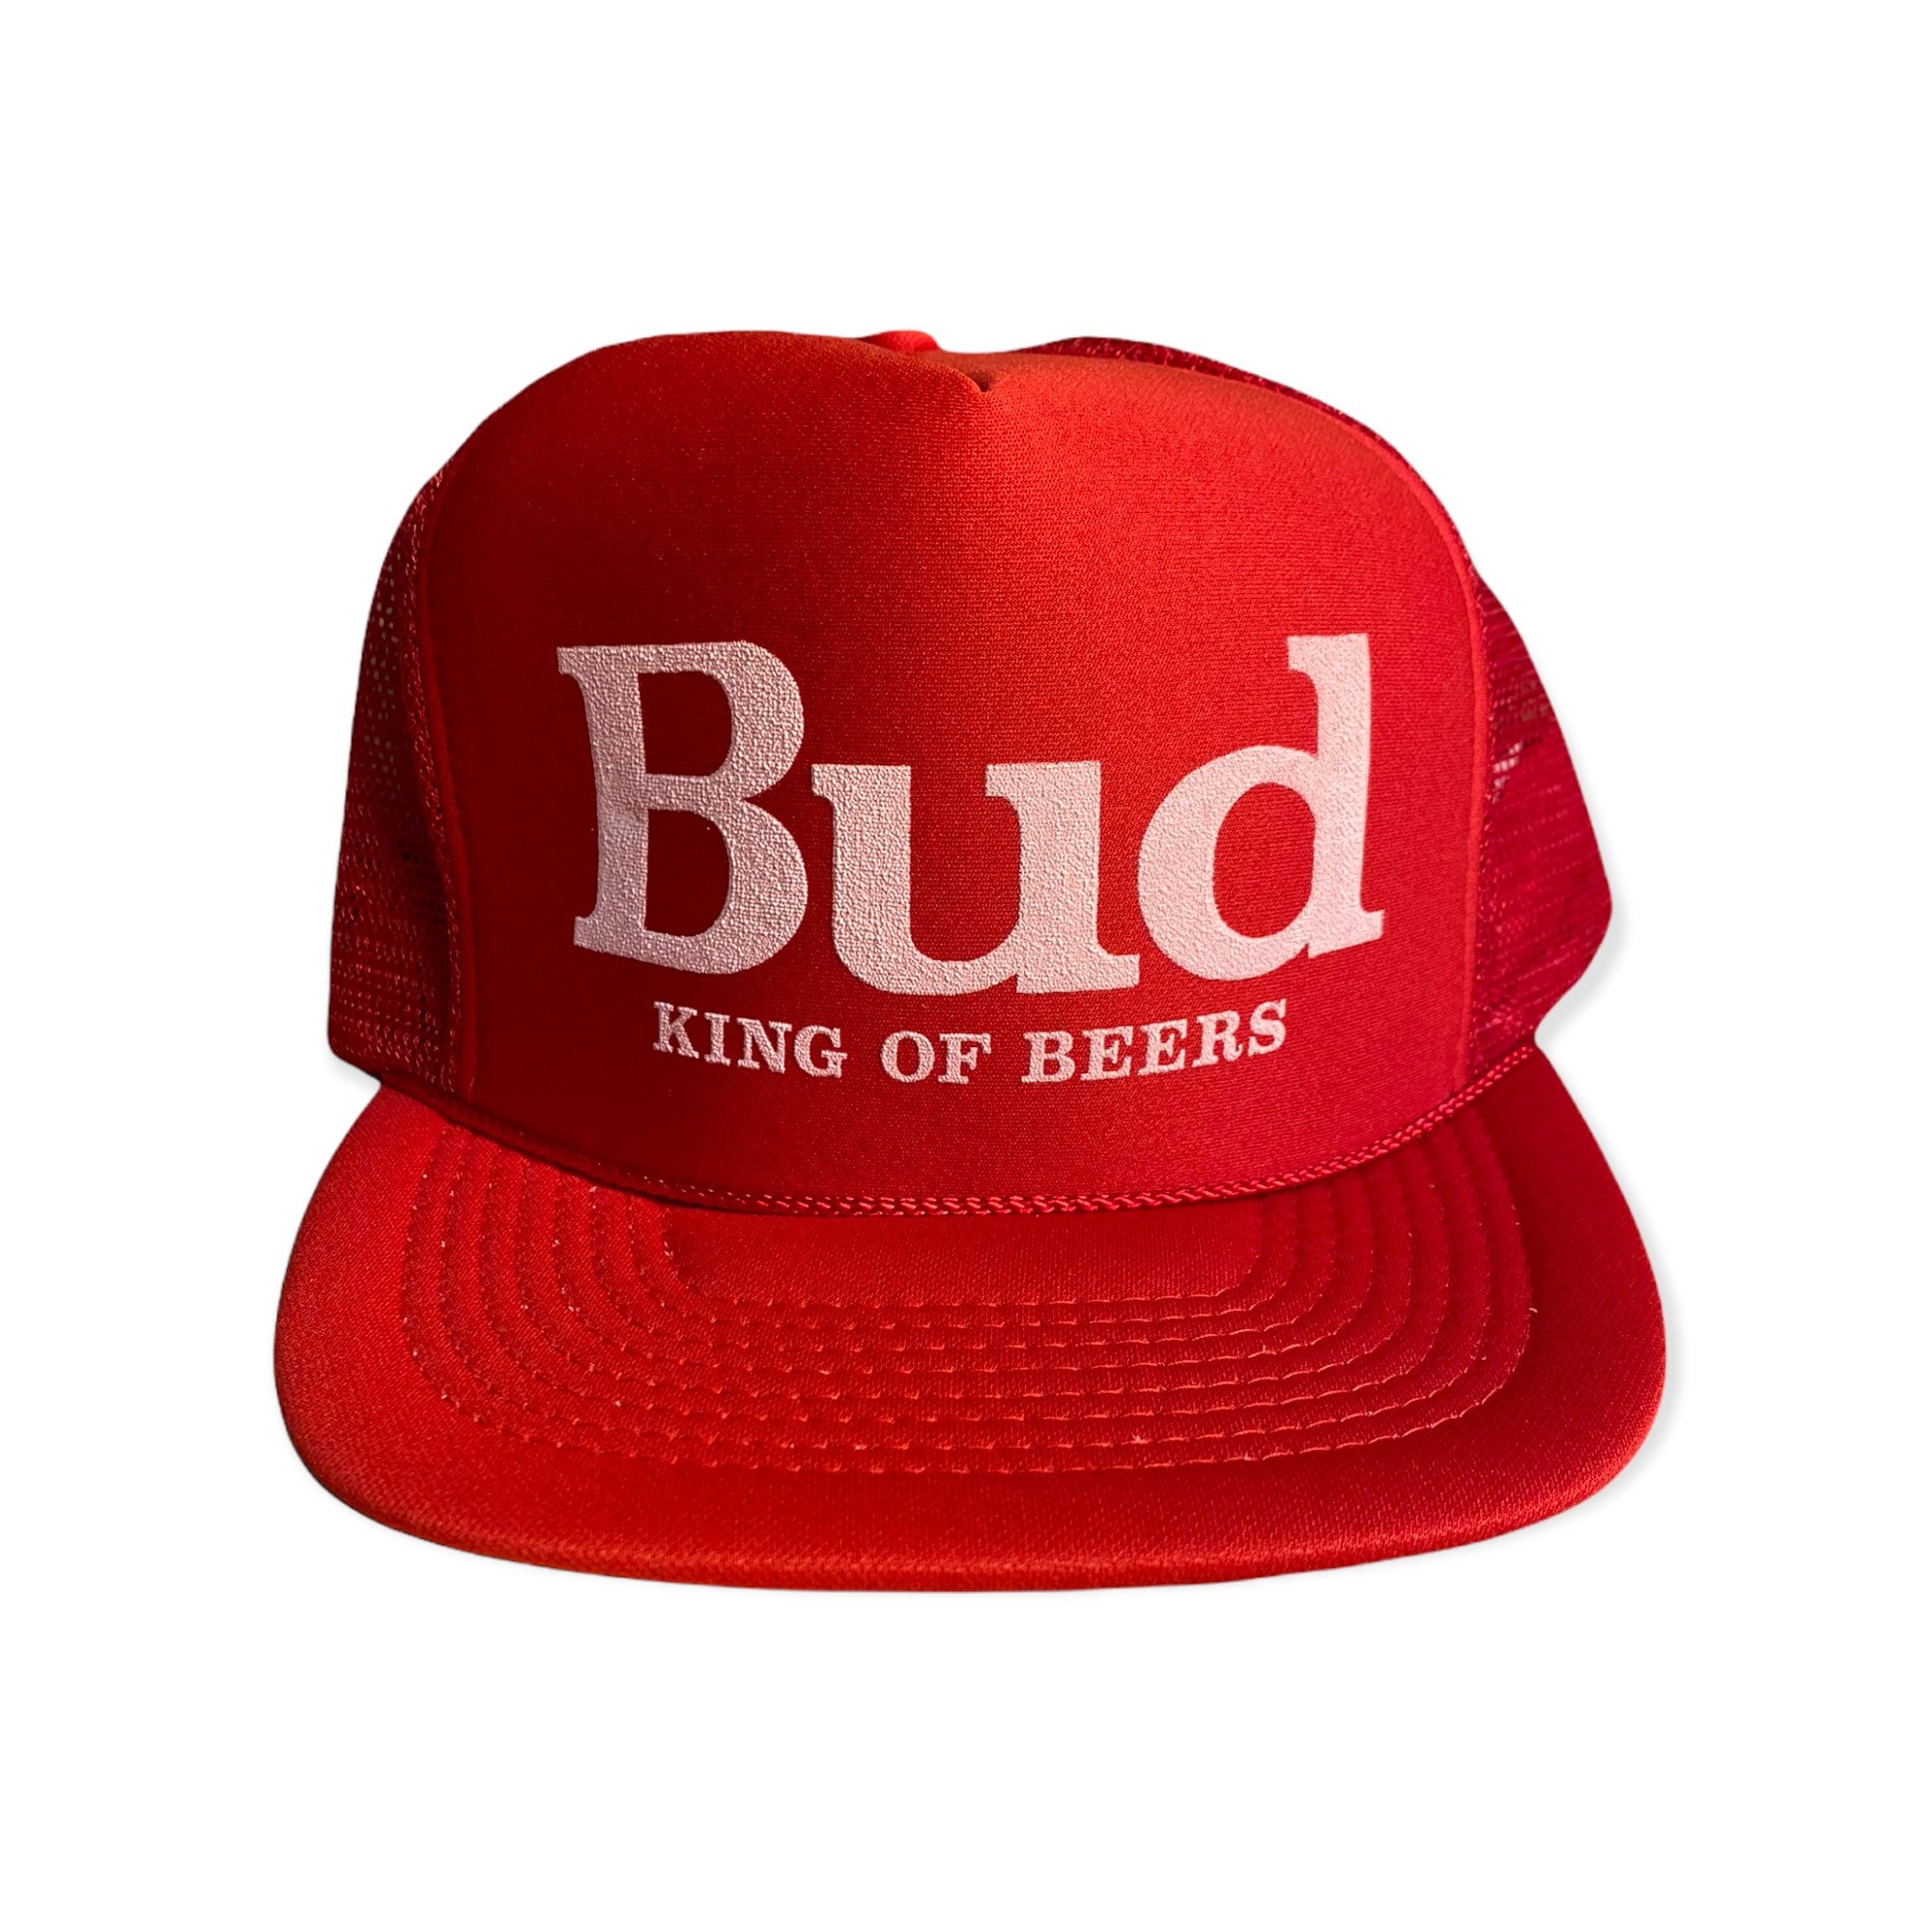 Vintage Budweiser Trucker Hat // New Old Stock Deadstock // Adult Size //  Red King of Beers Hat // Party Festival Rave // Nos Ds Cap // - Etsy